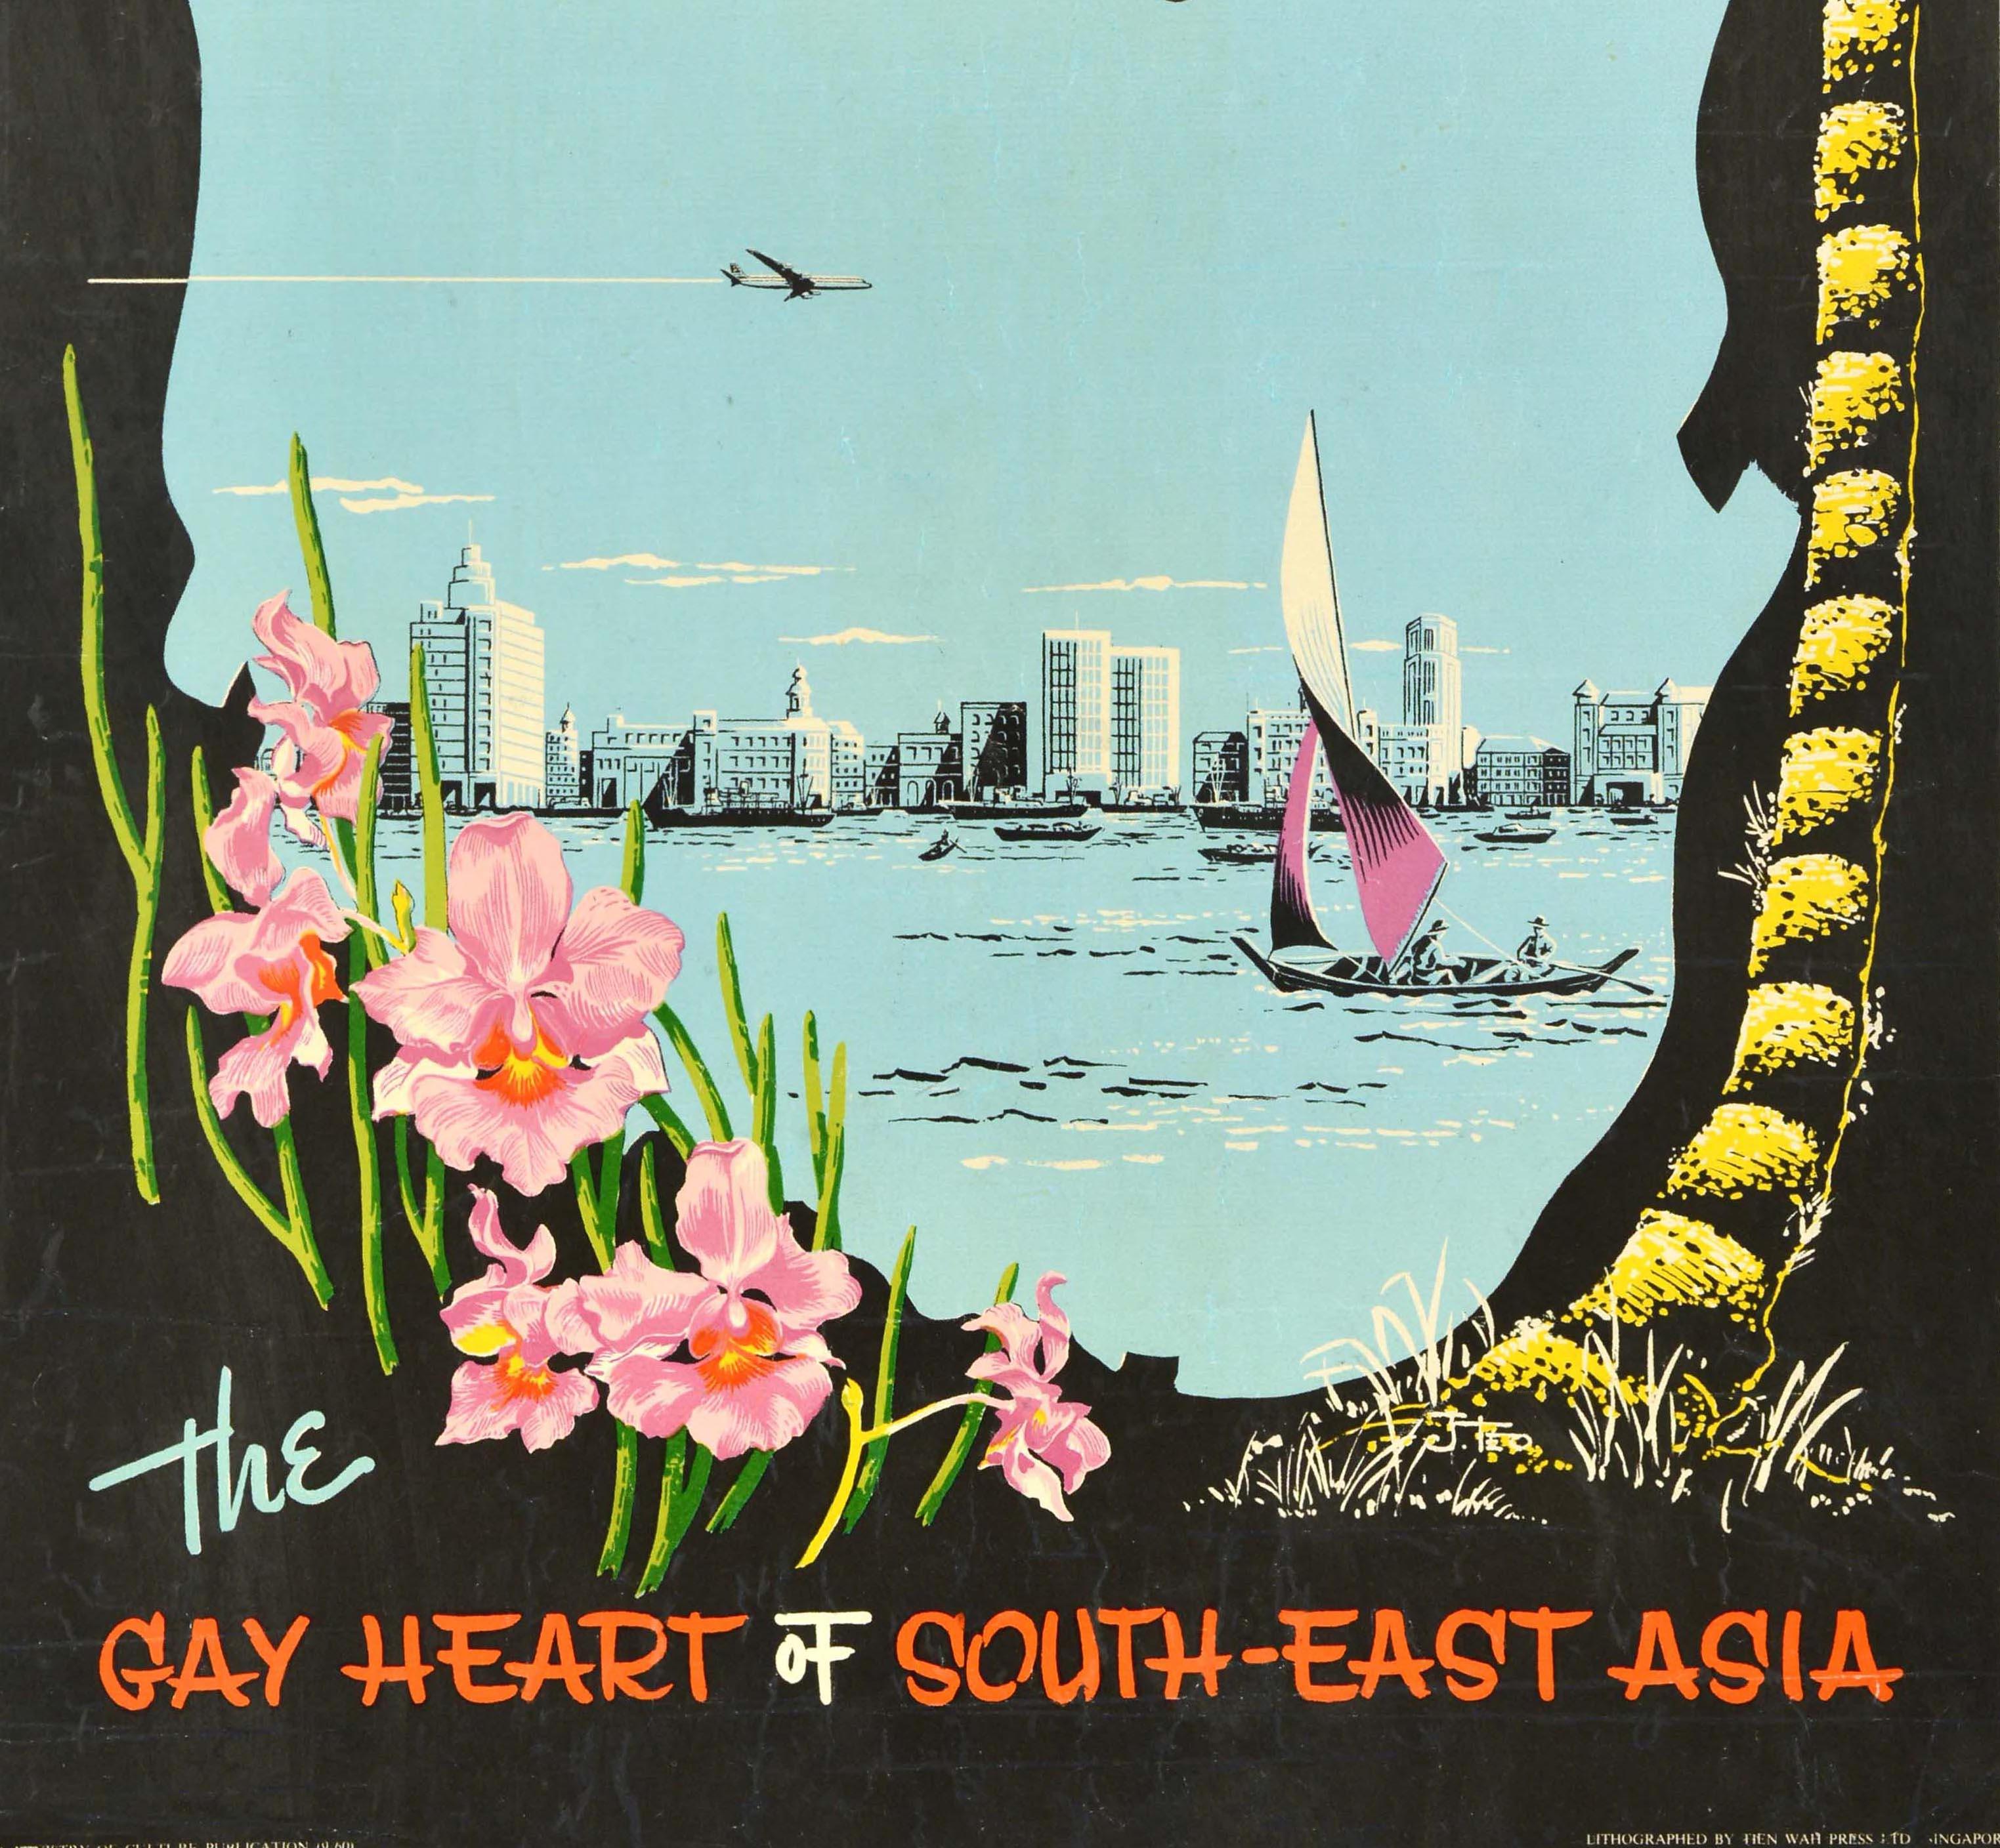 Original Vintage Travel Poster Singapore Gay Heart Of South East Asia Orchid Art 1